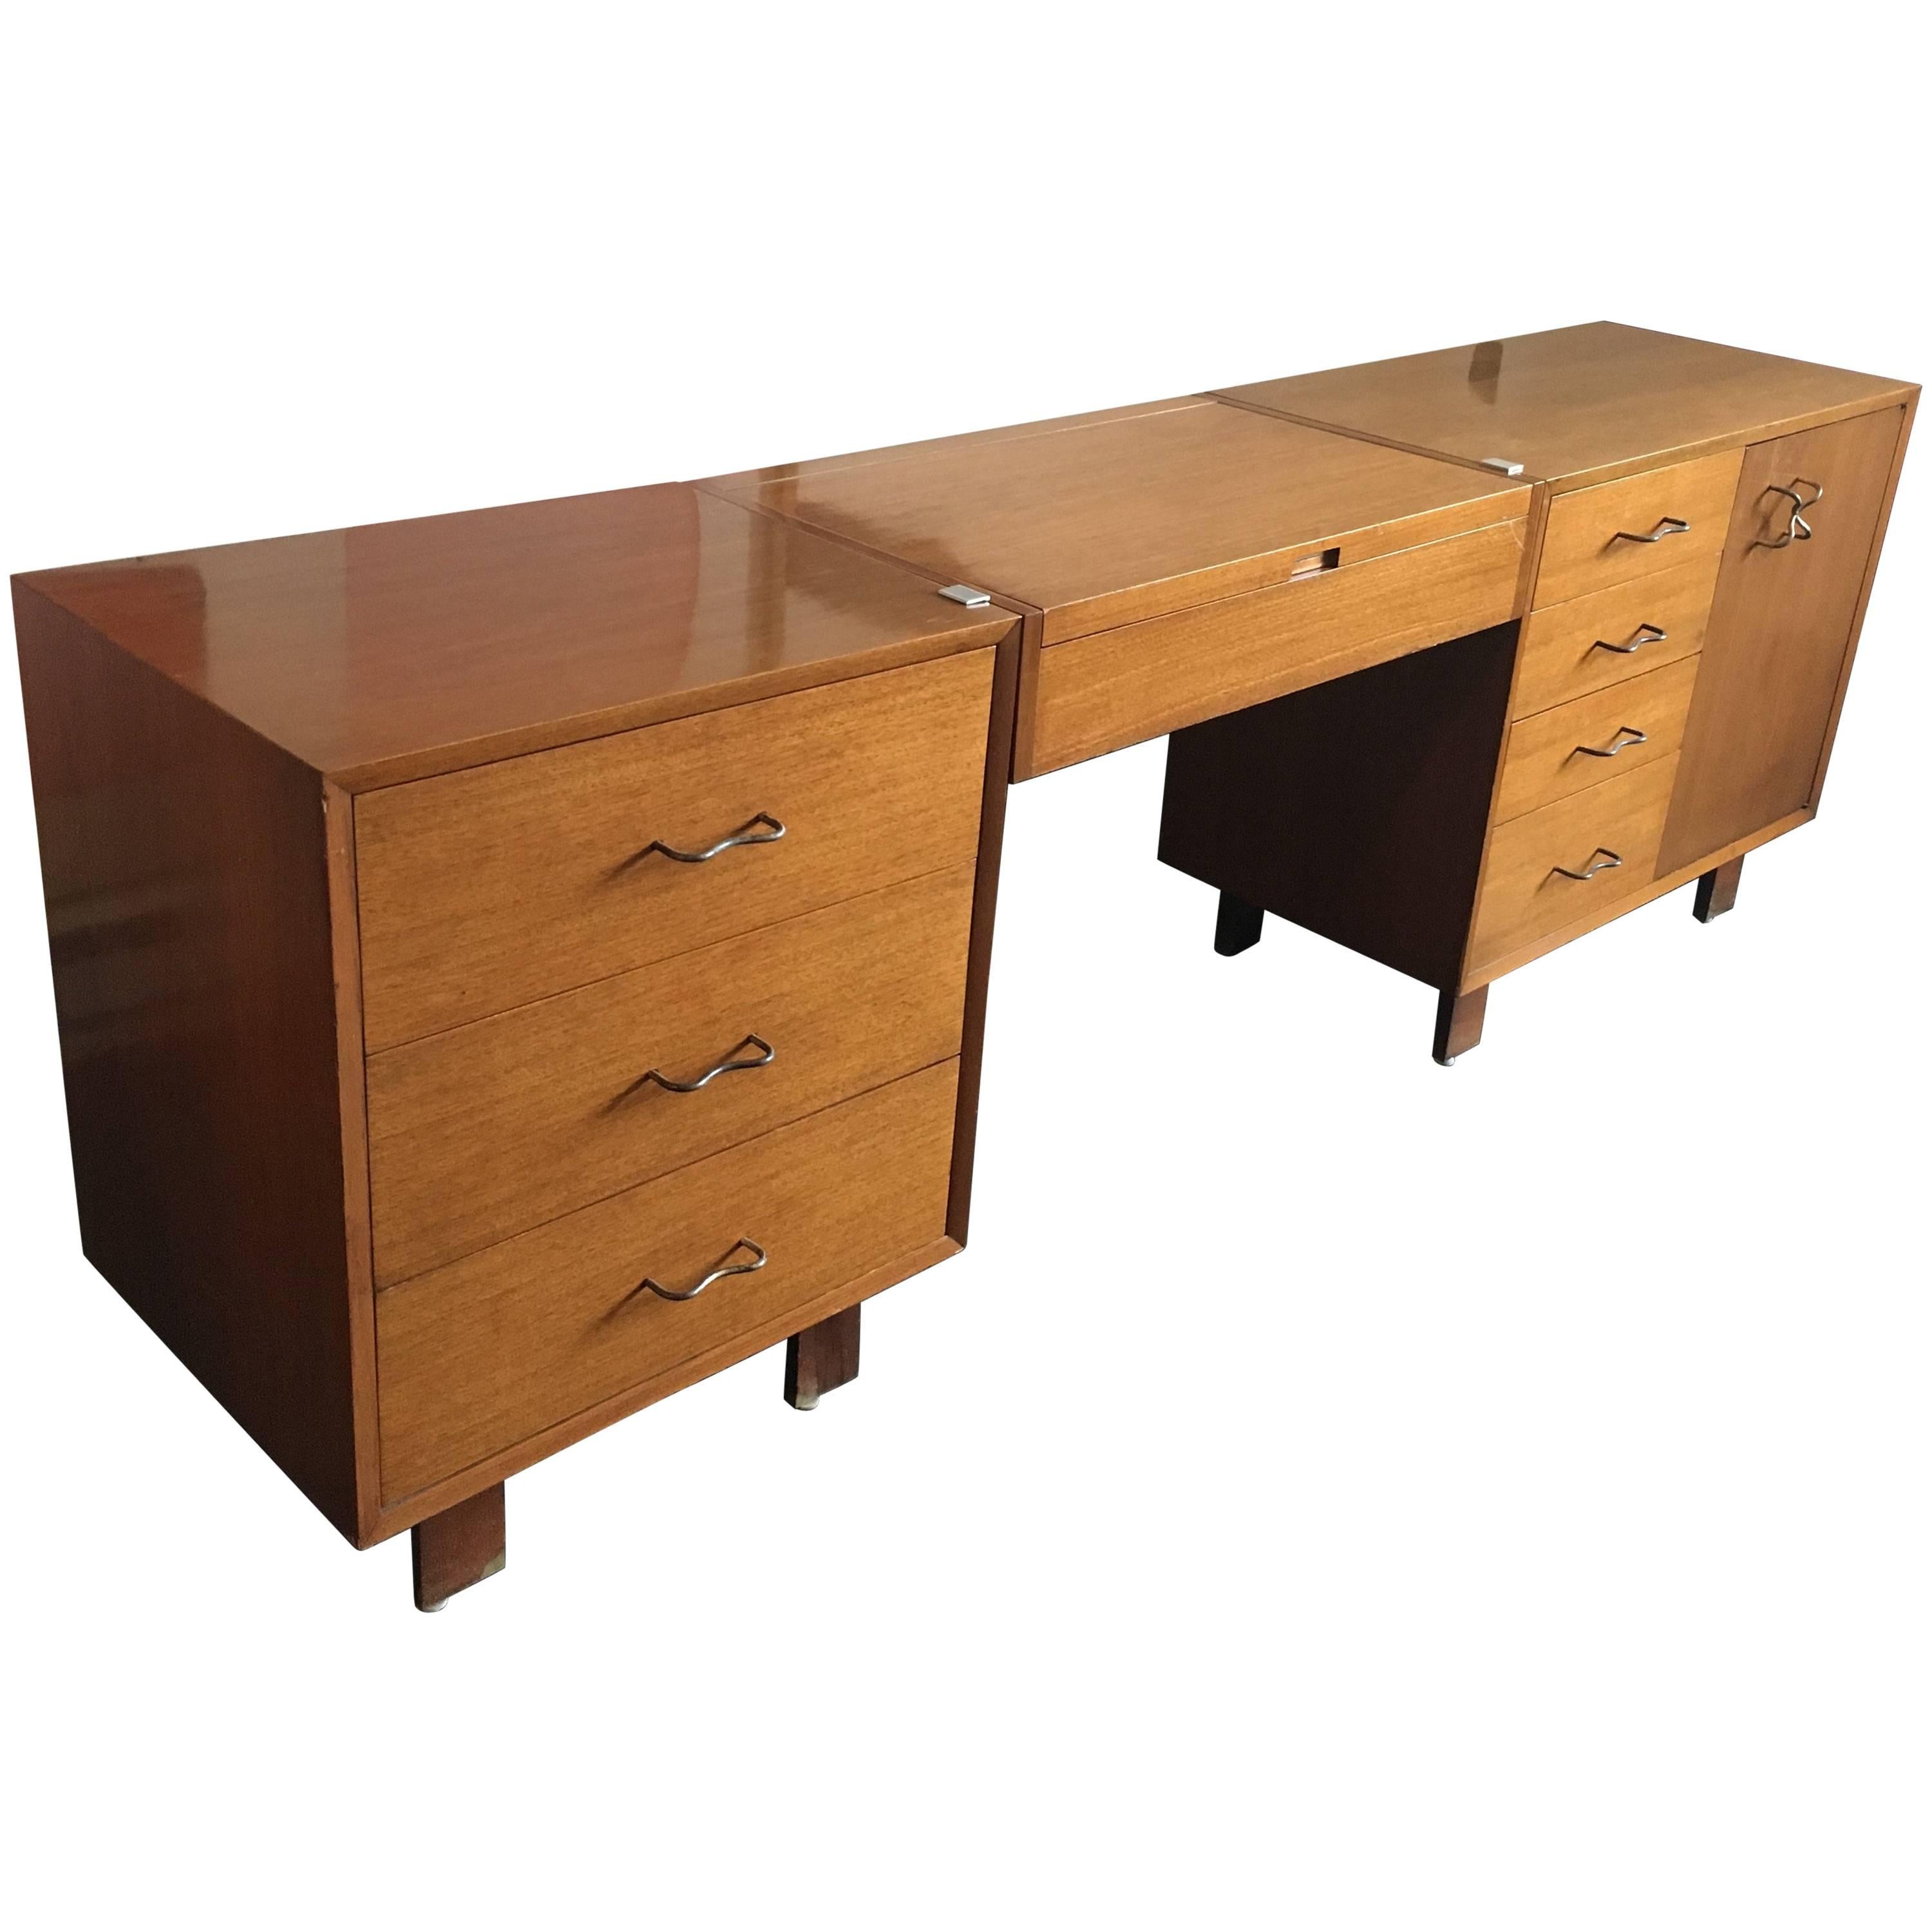 George Nelson Credenza/Dressers with Vanity/Desk Herman Miller, 1950 For Sale